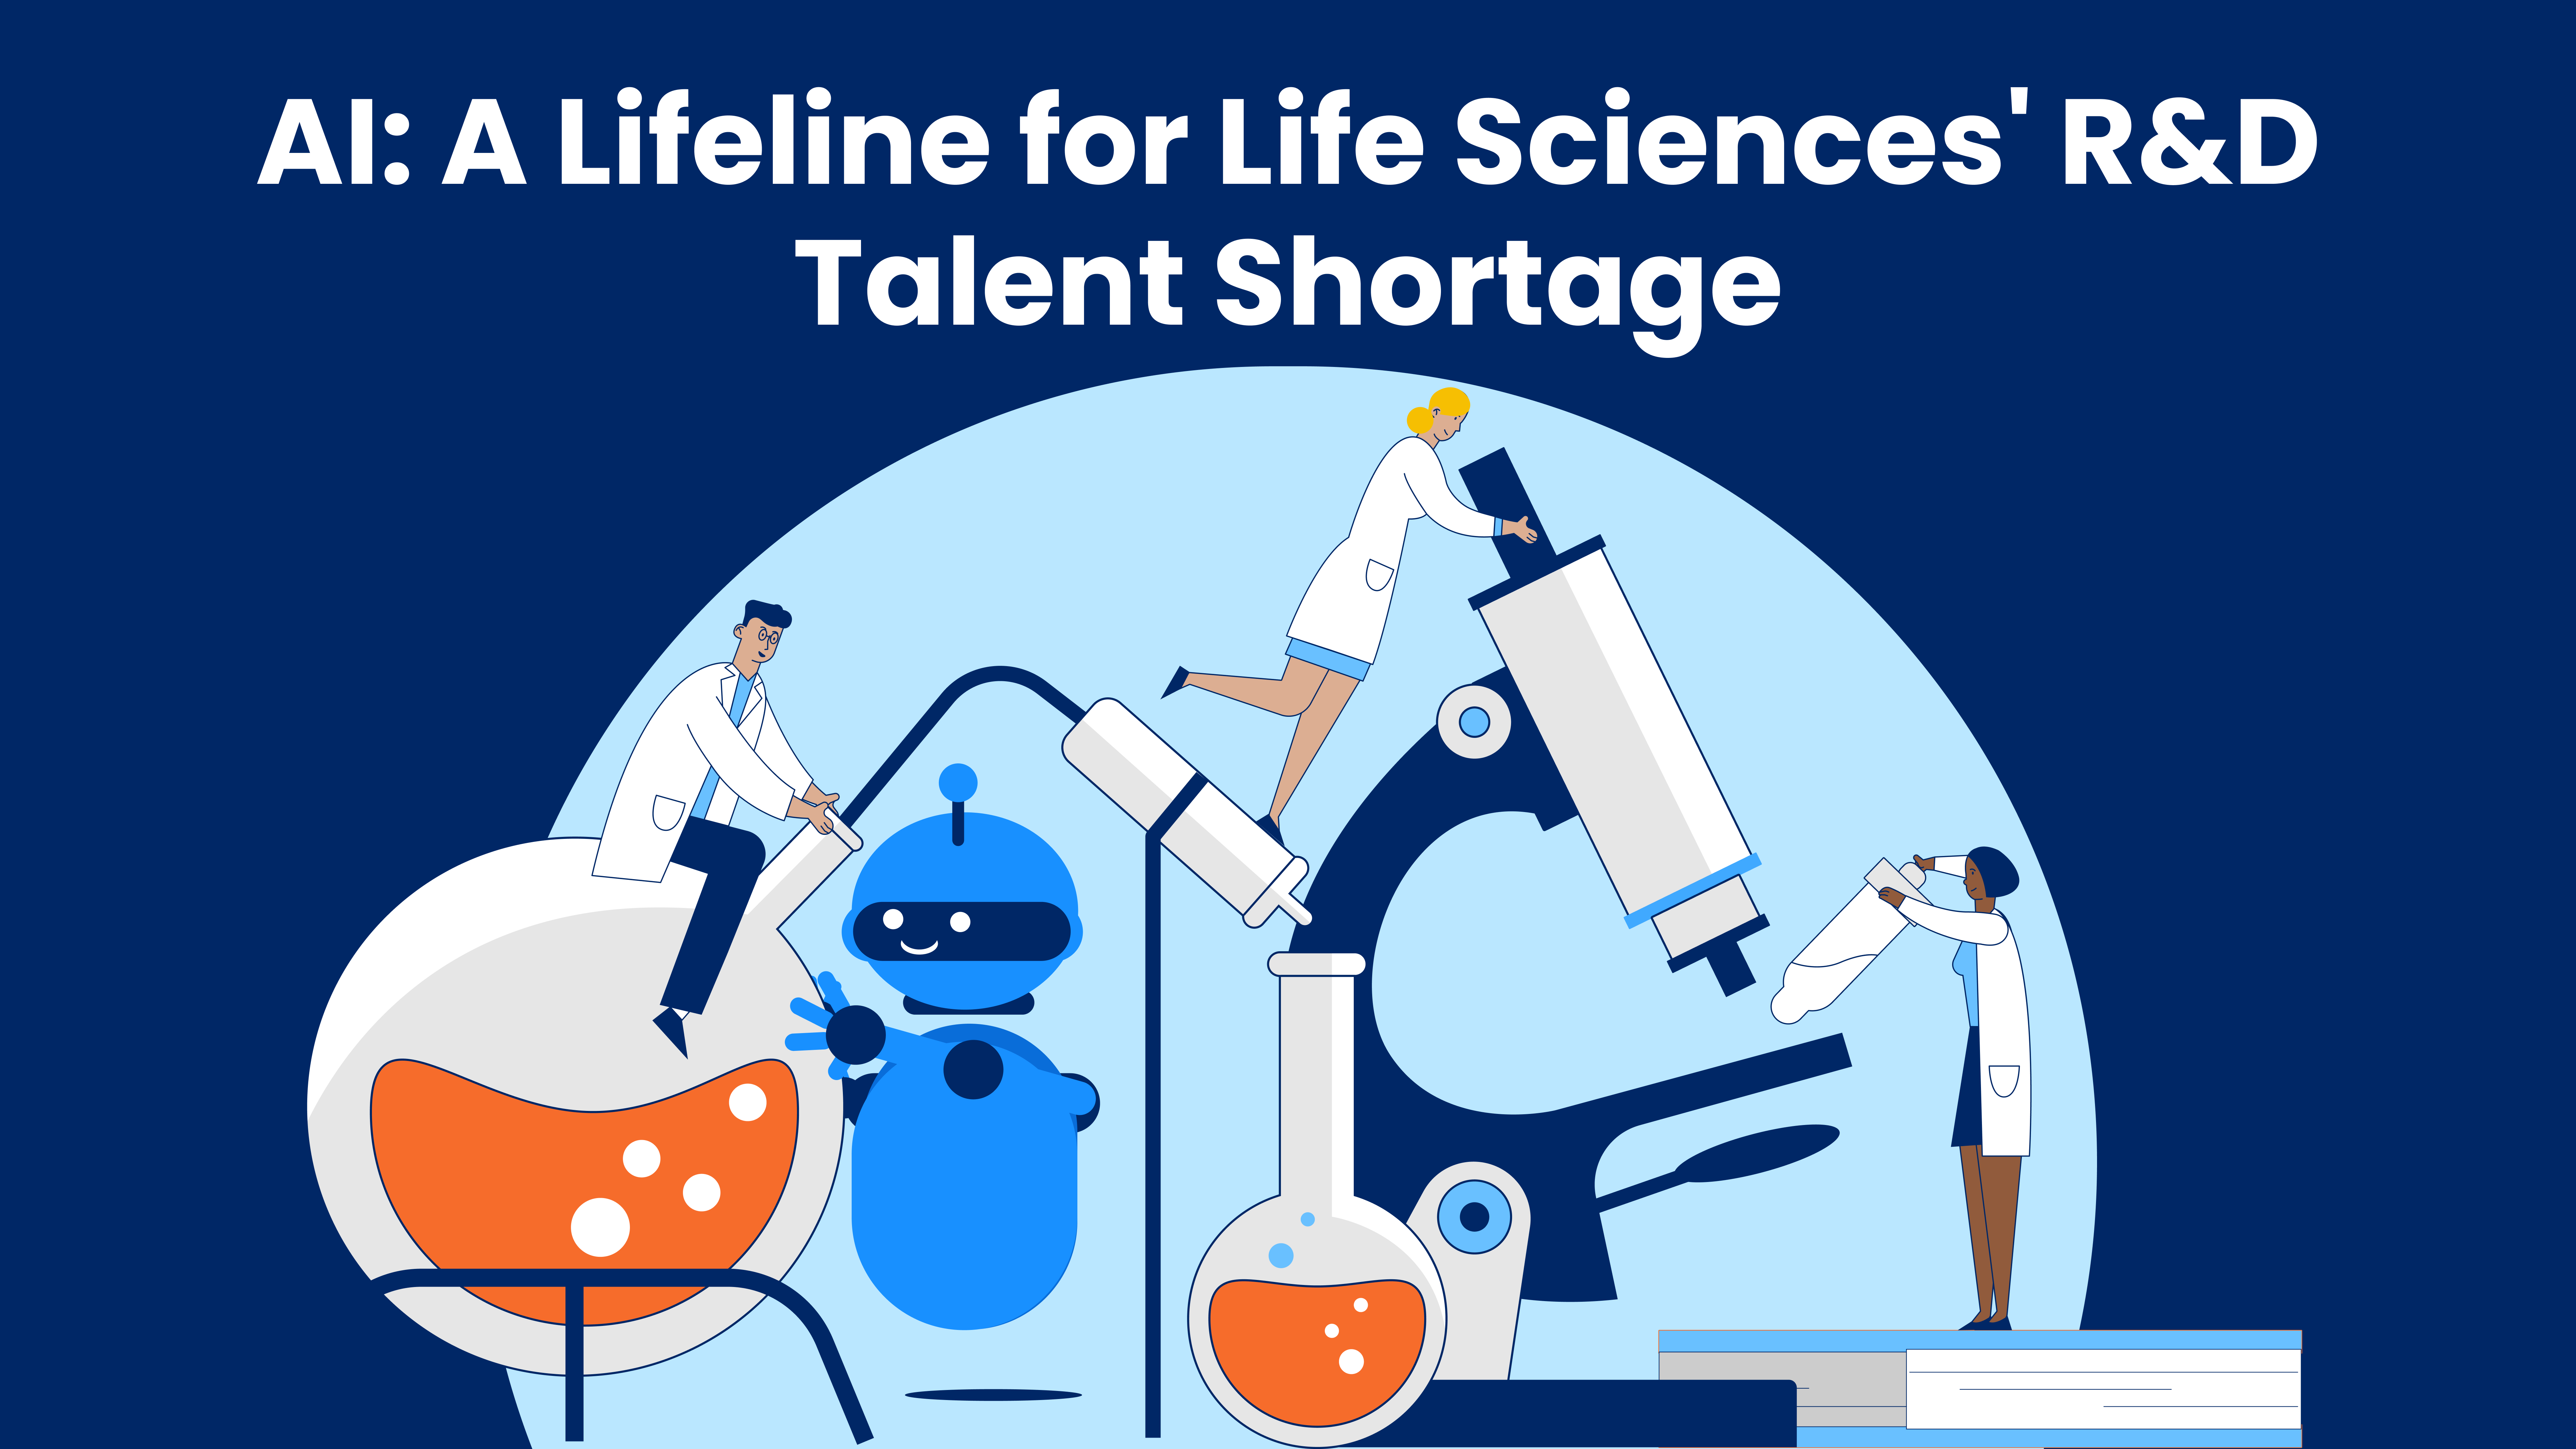 Leveraging AI to Beat the R&D Talent Shortage: a Lifeline for the Life Sciences Industry